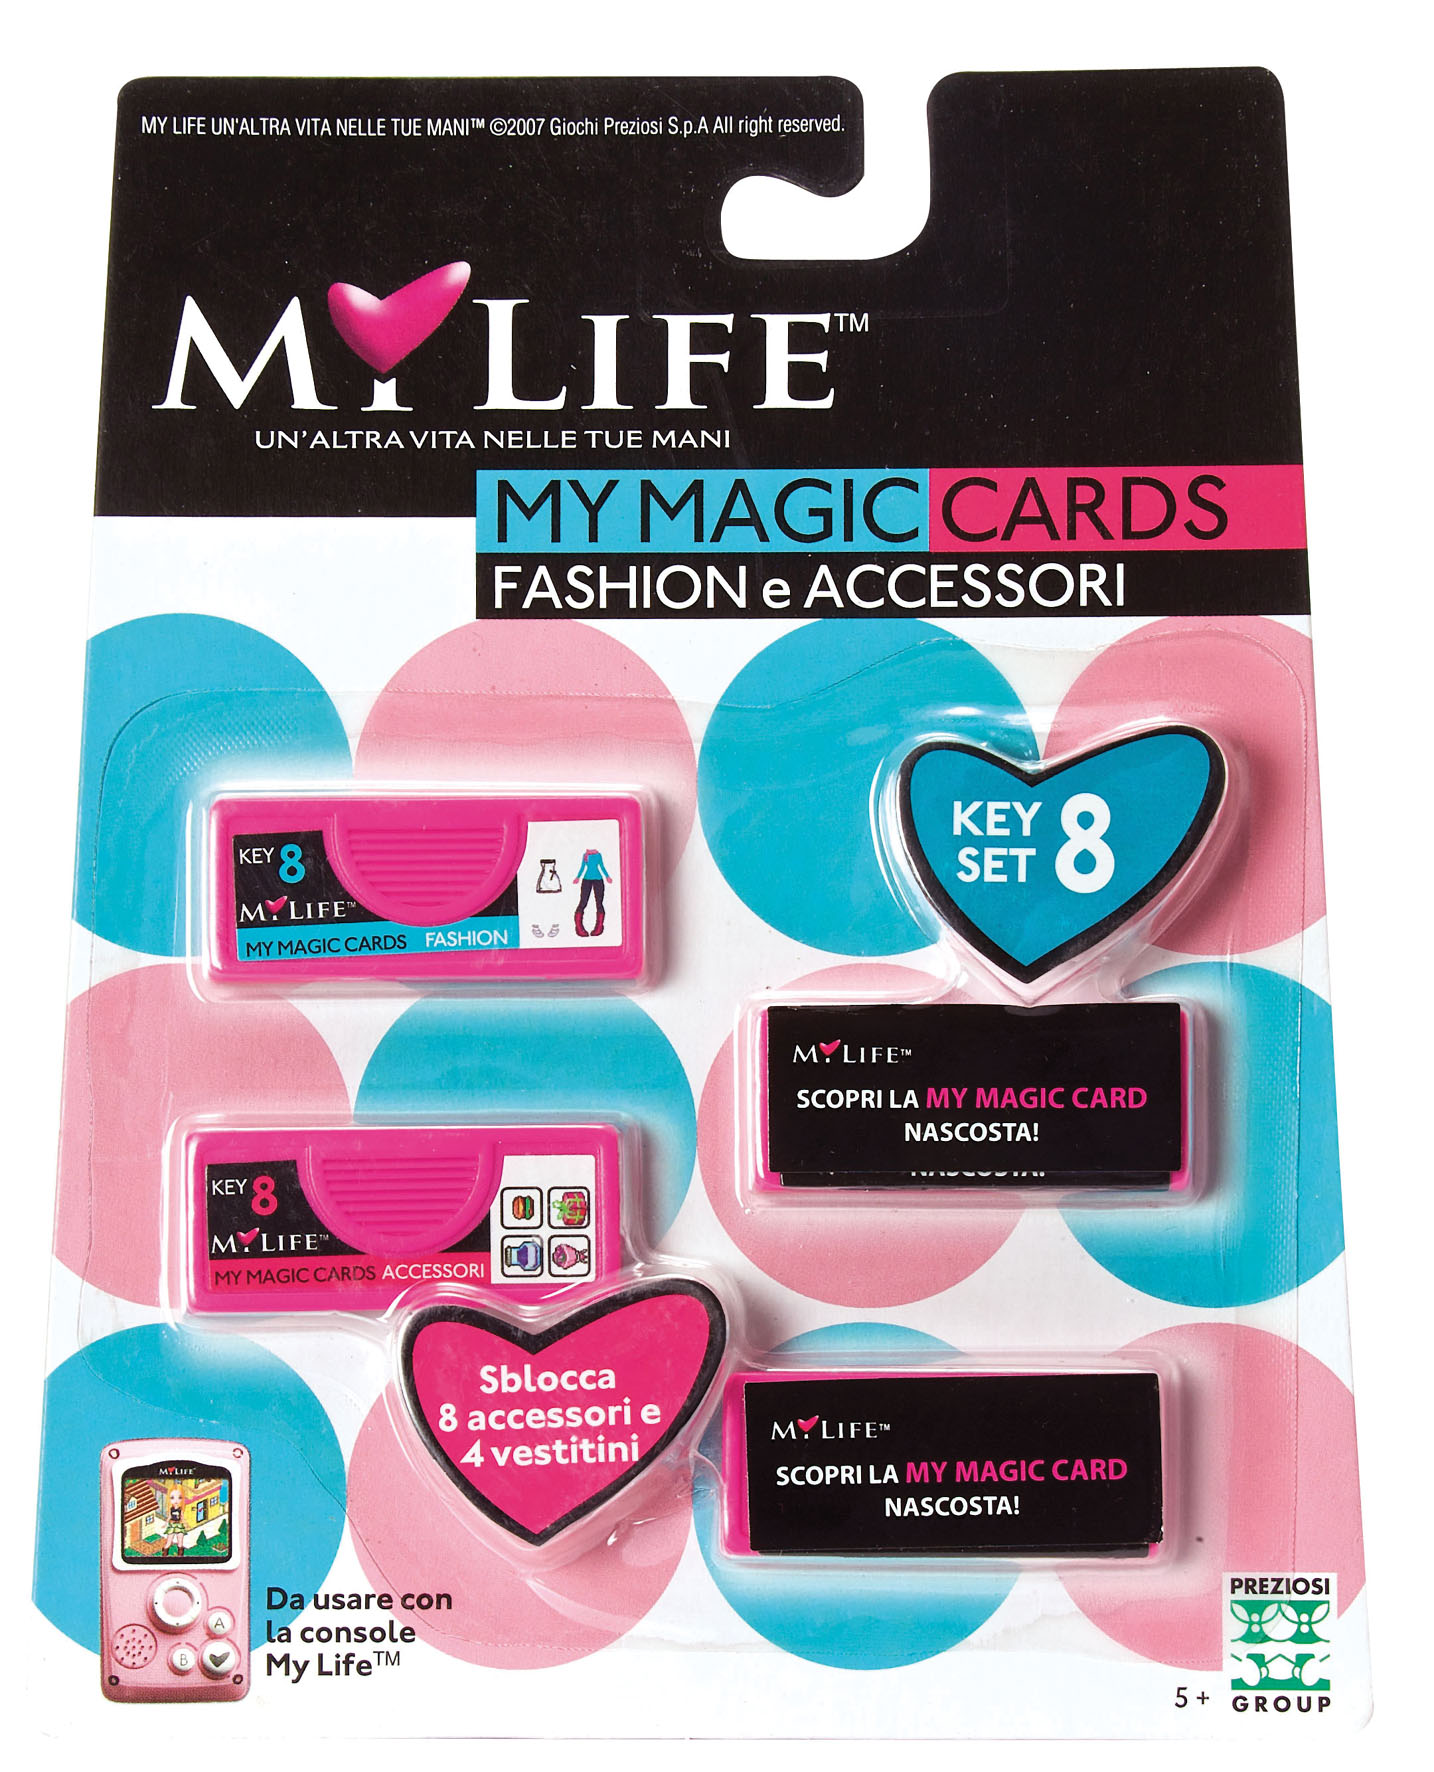 MY LIFE MAGICCARDS FASHION ACC